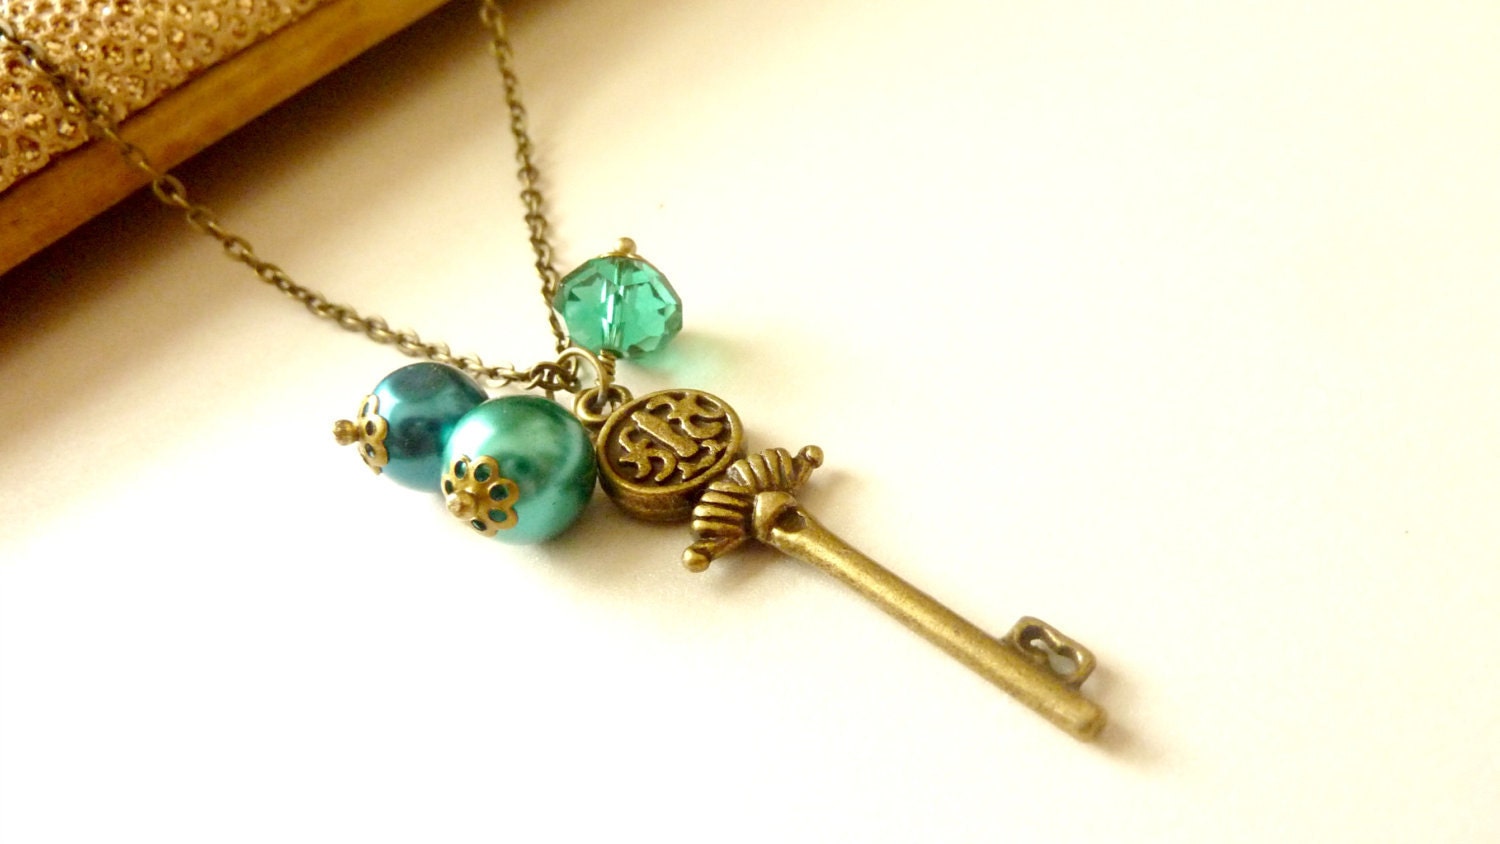 Vintage necklace brass charm scepter key chain with teal glass pearls and crystal beads